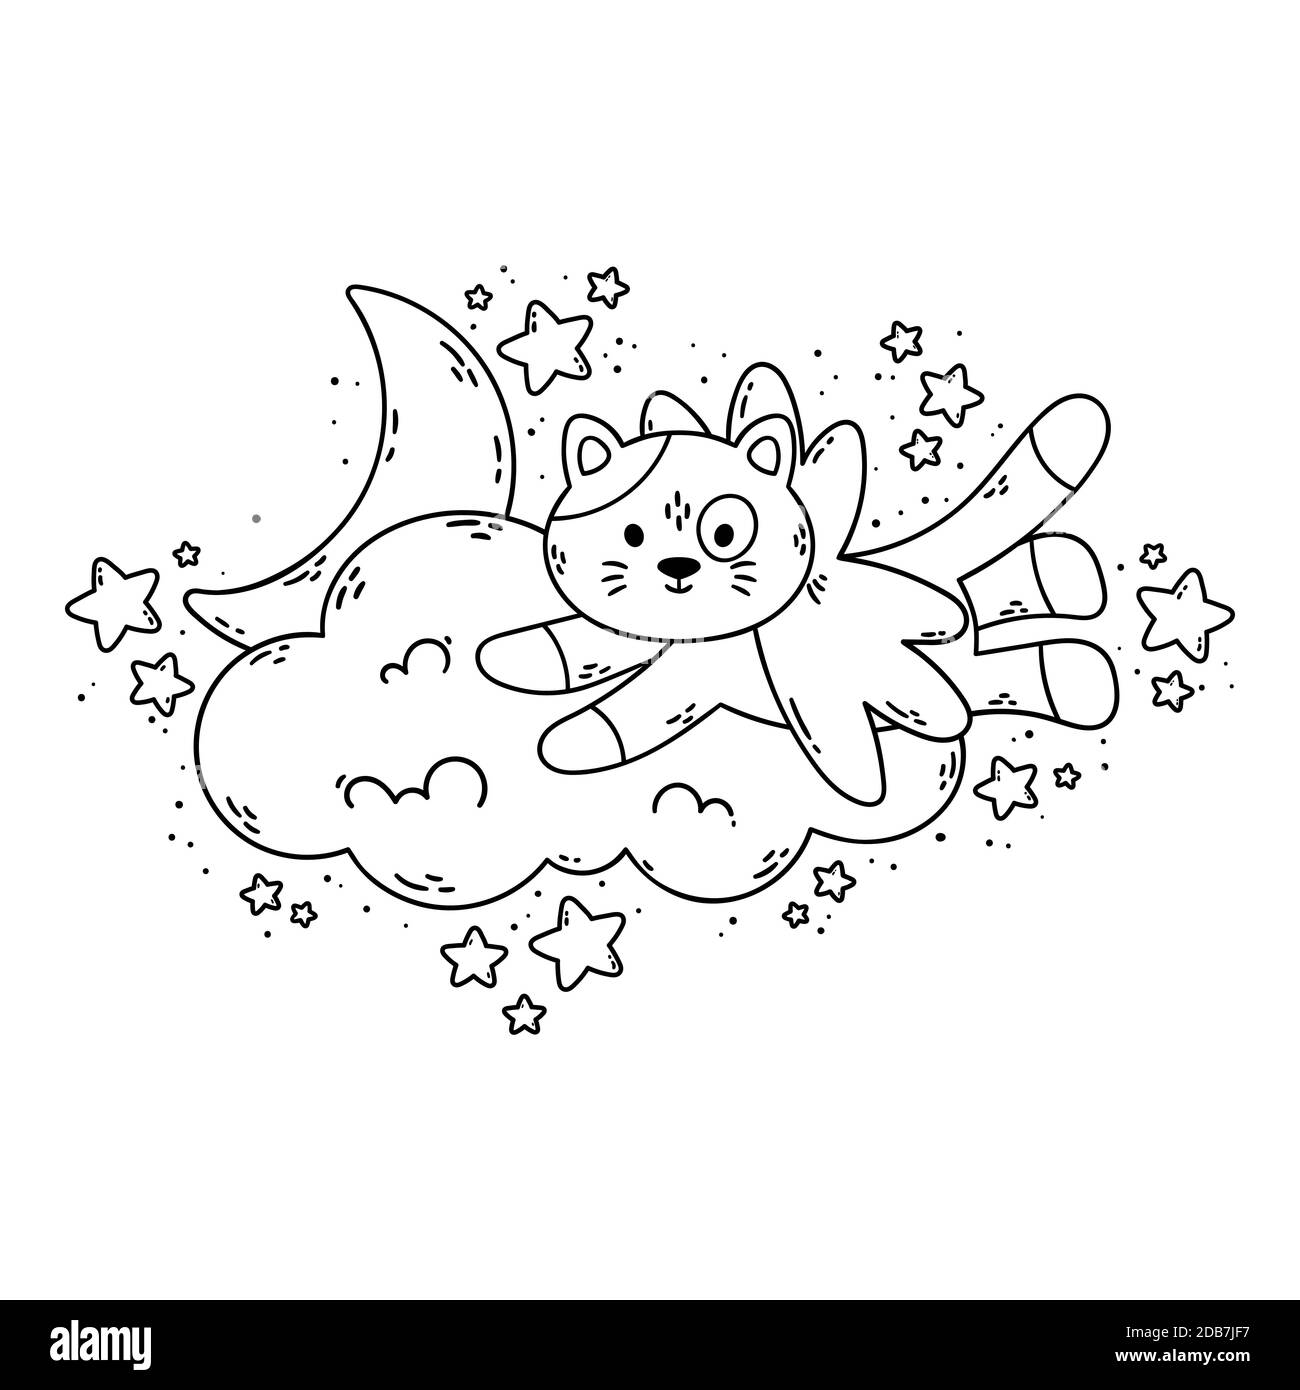 Cat with wings flies past the cloud, the moon, and stars. Vector illustration for coloring book isolated on white background. Good night nursery pictu Stock Vector